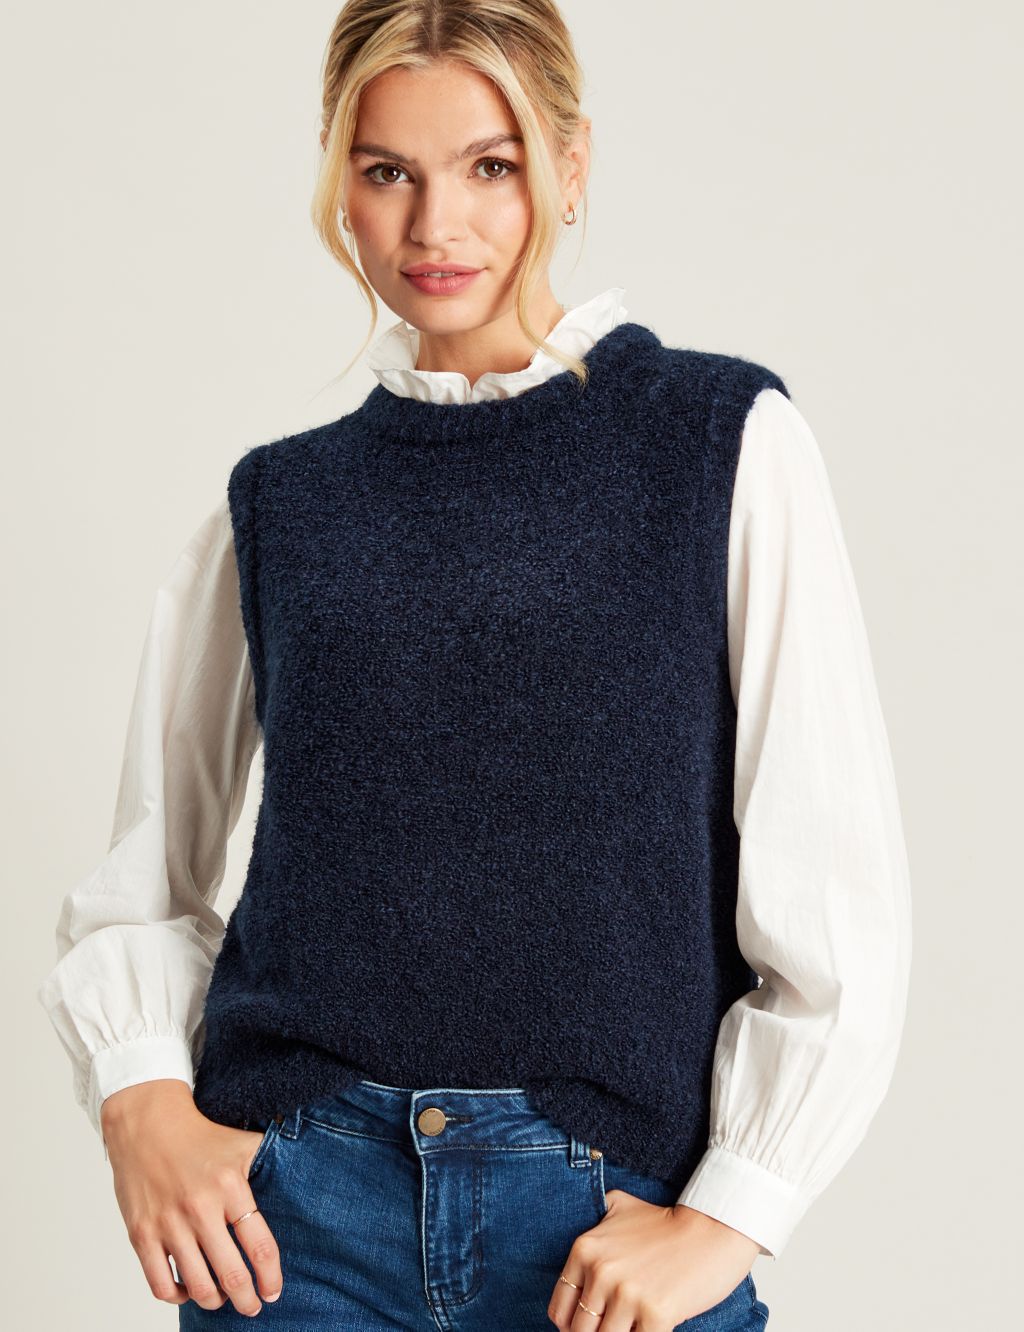 Textured Crew Neck Knitted Vest | Joules | M&S